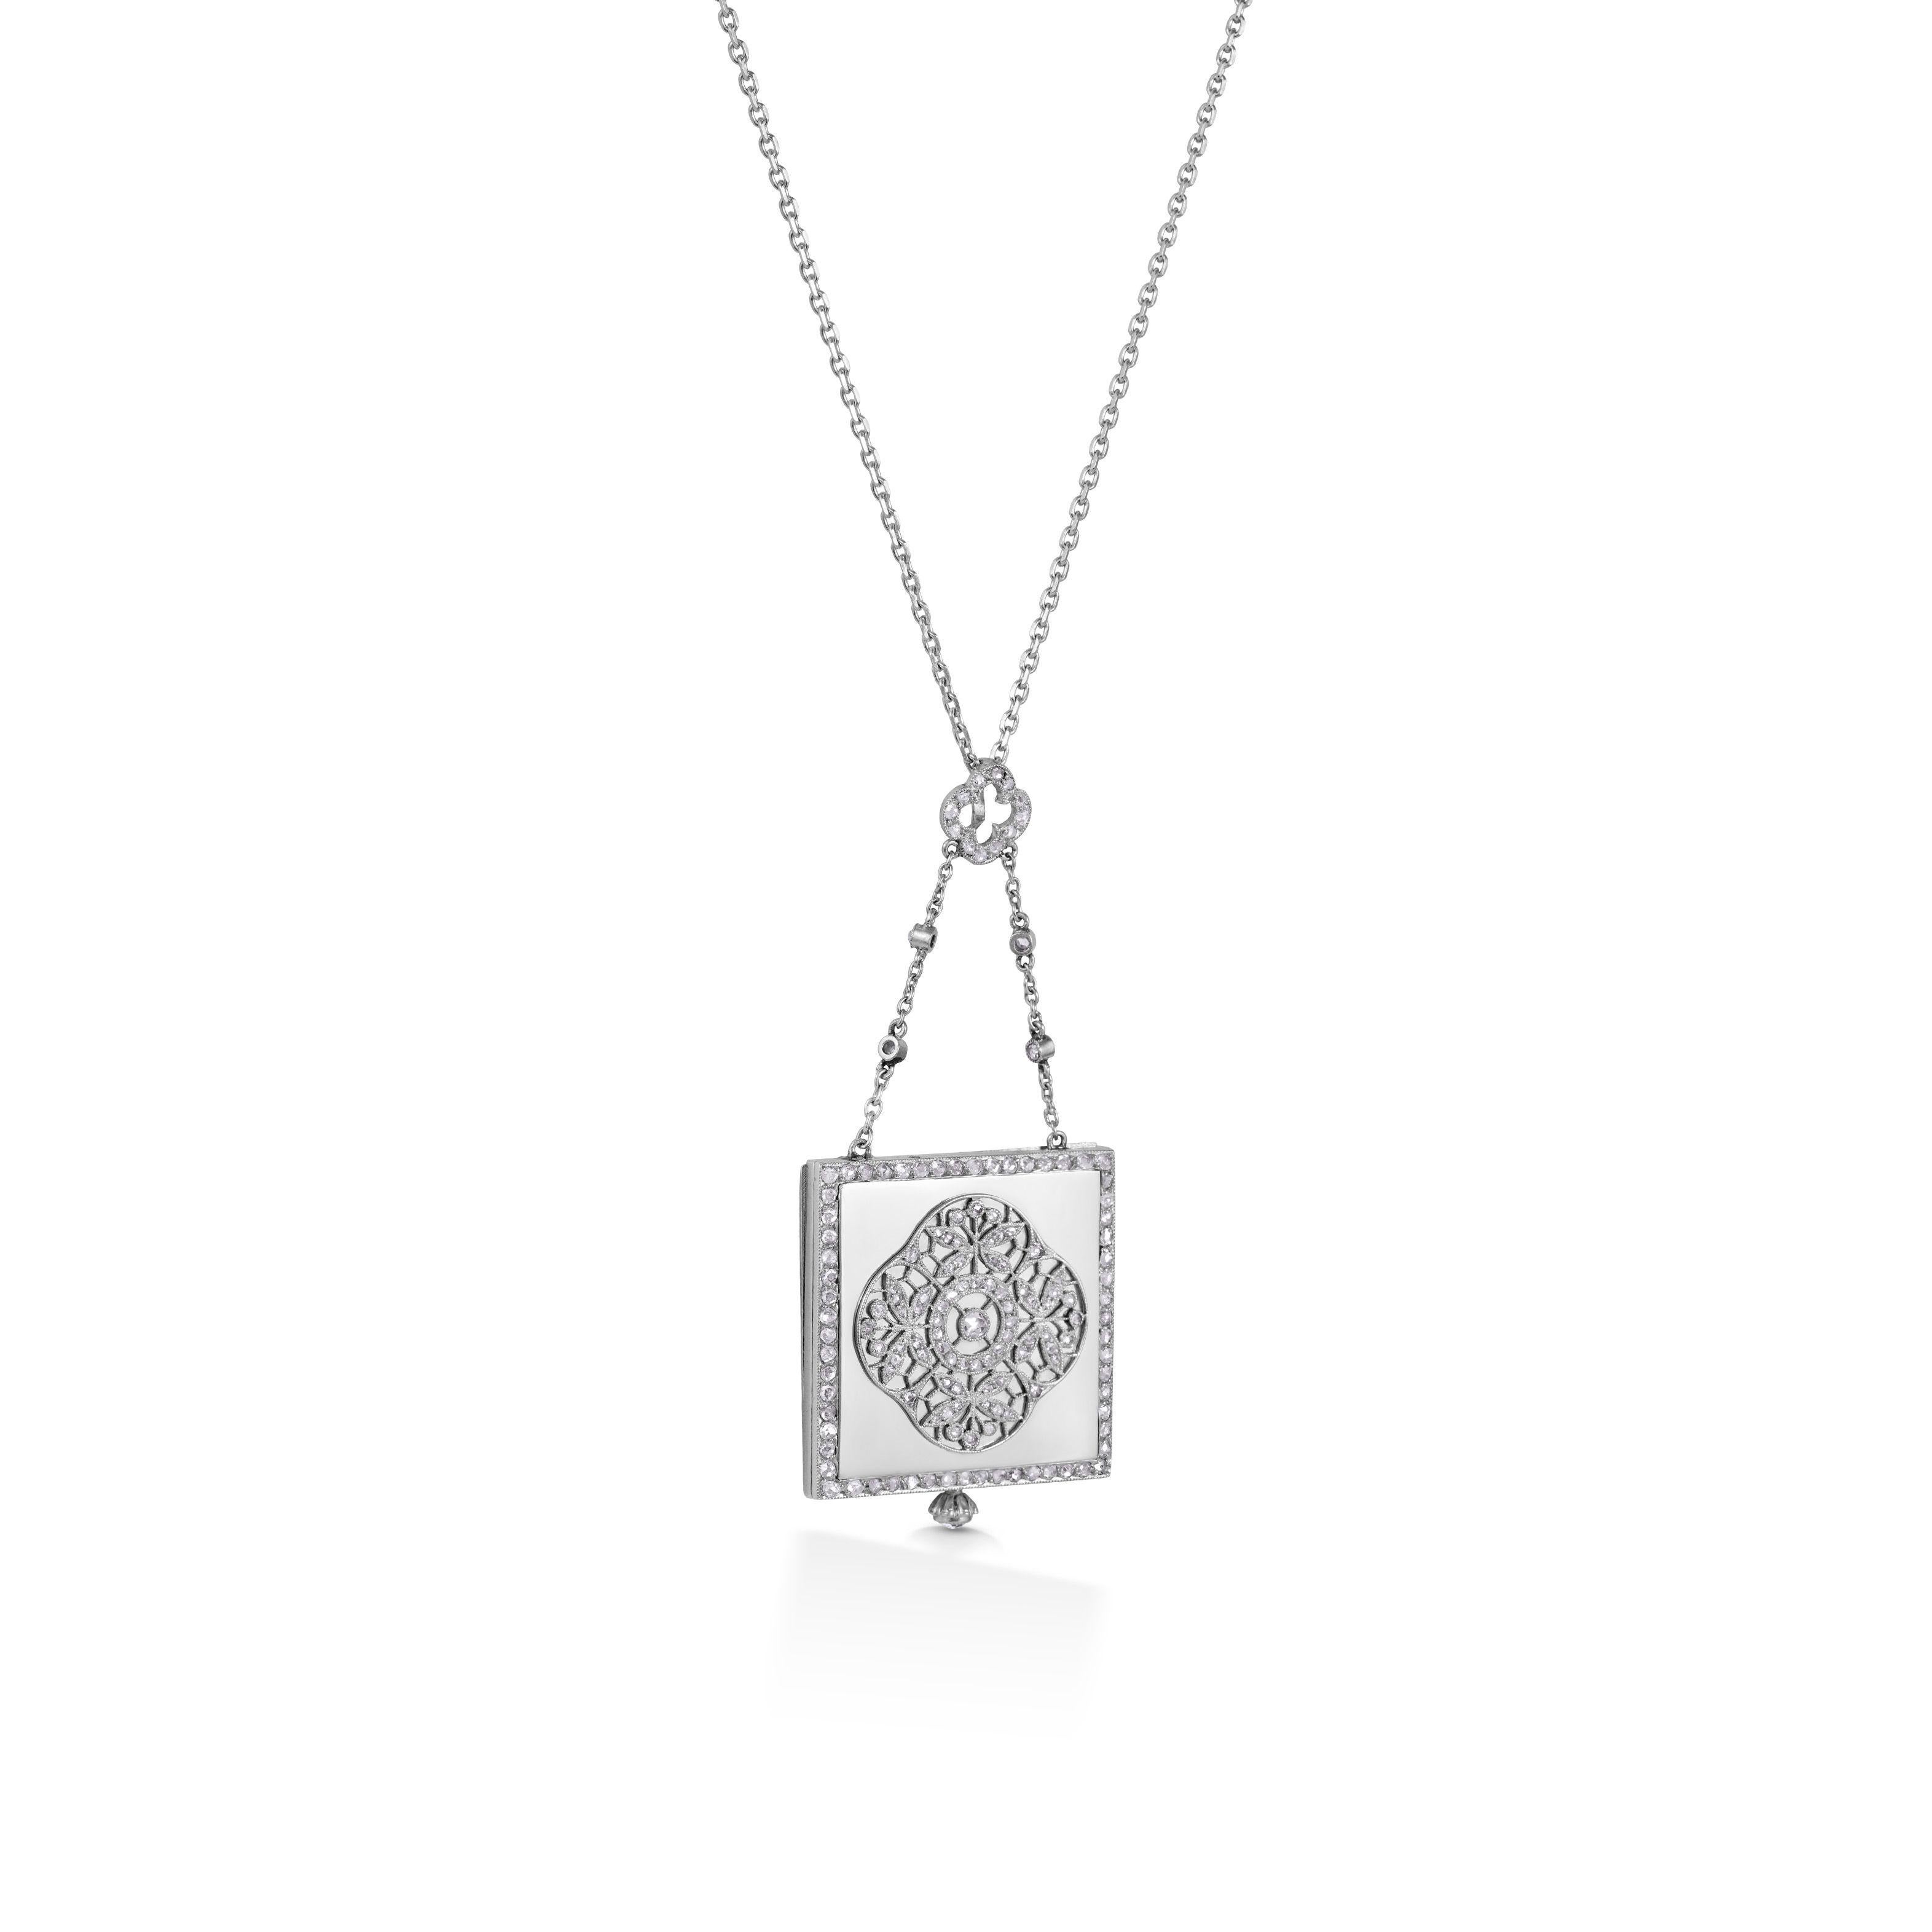 Simply Beautiful! Art Deco Diamond and Gold Reversible Watch Necklace Pendant; suspended from a 14K White Gold Chain. Hand set with Diamonds, weighing approx. 0.56tcw. Circa 1930s. Hand crafted in 14K White Gold. The watch is fully functional. More